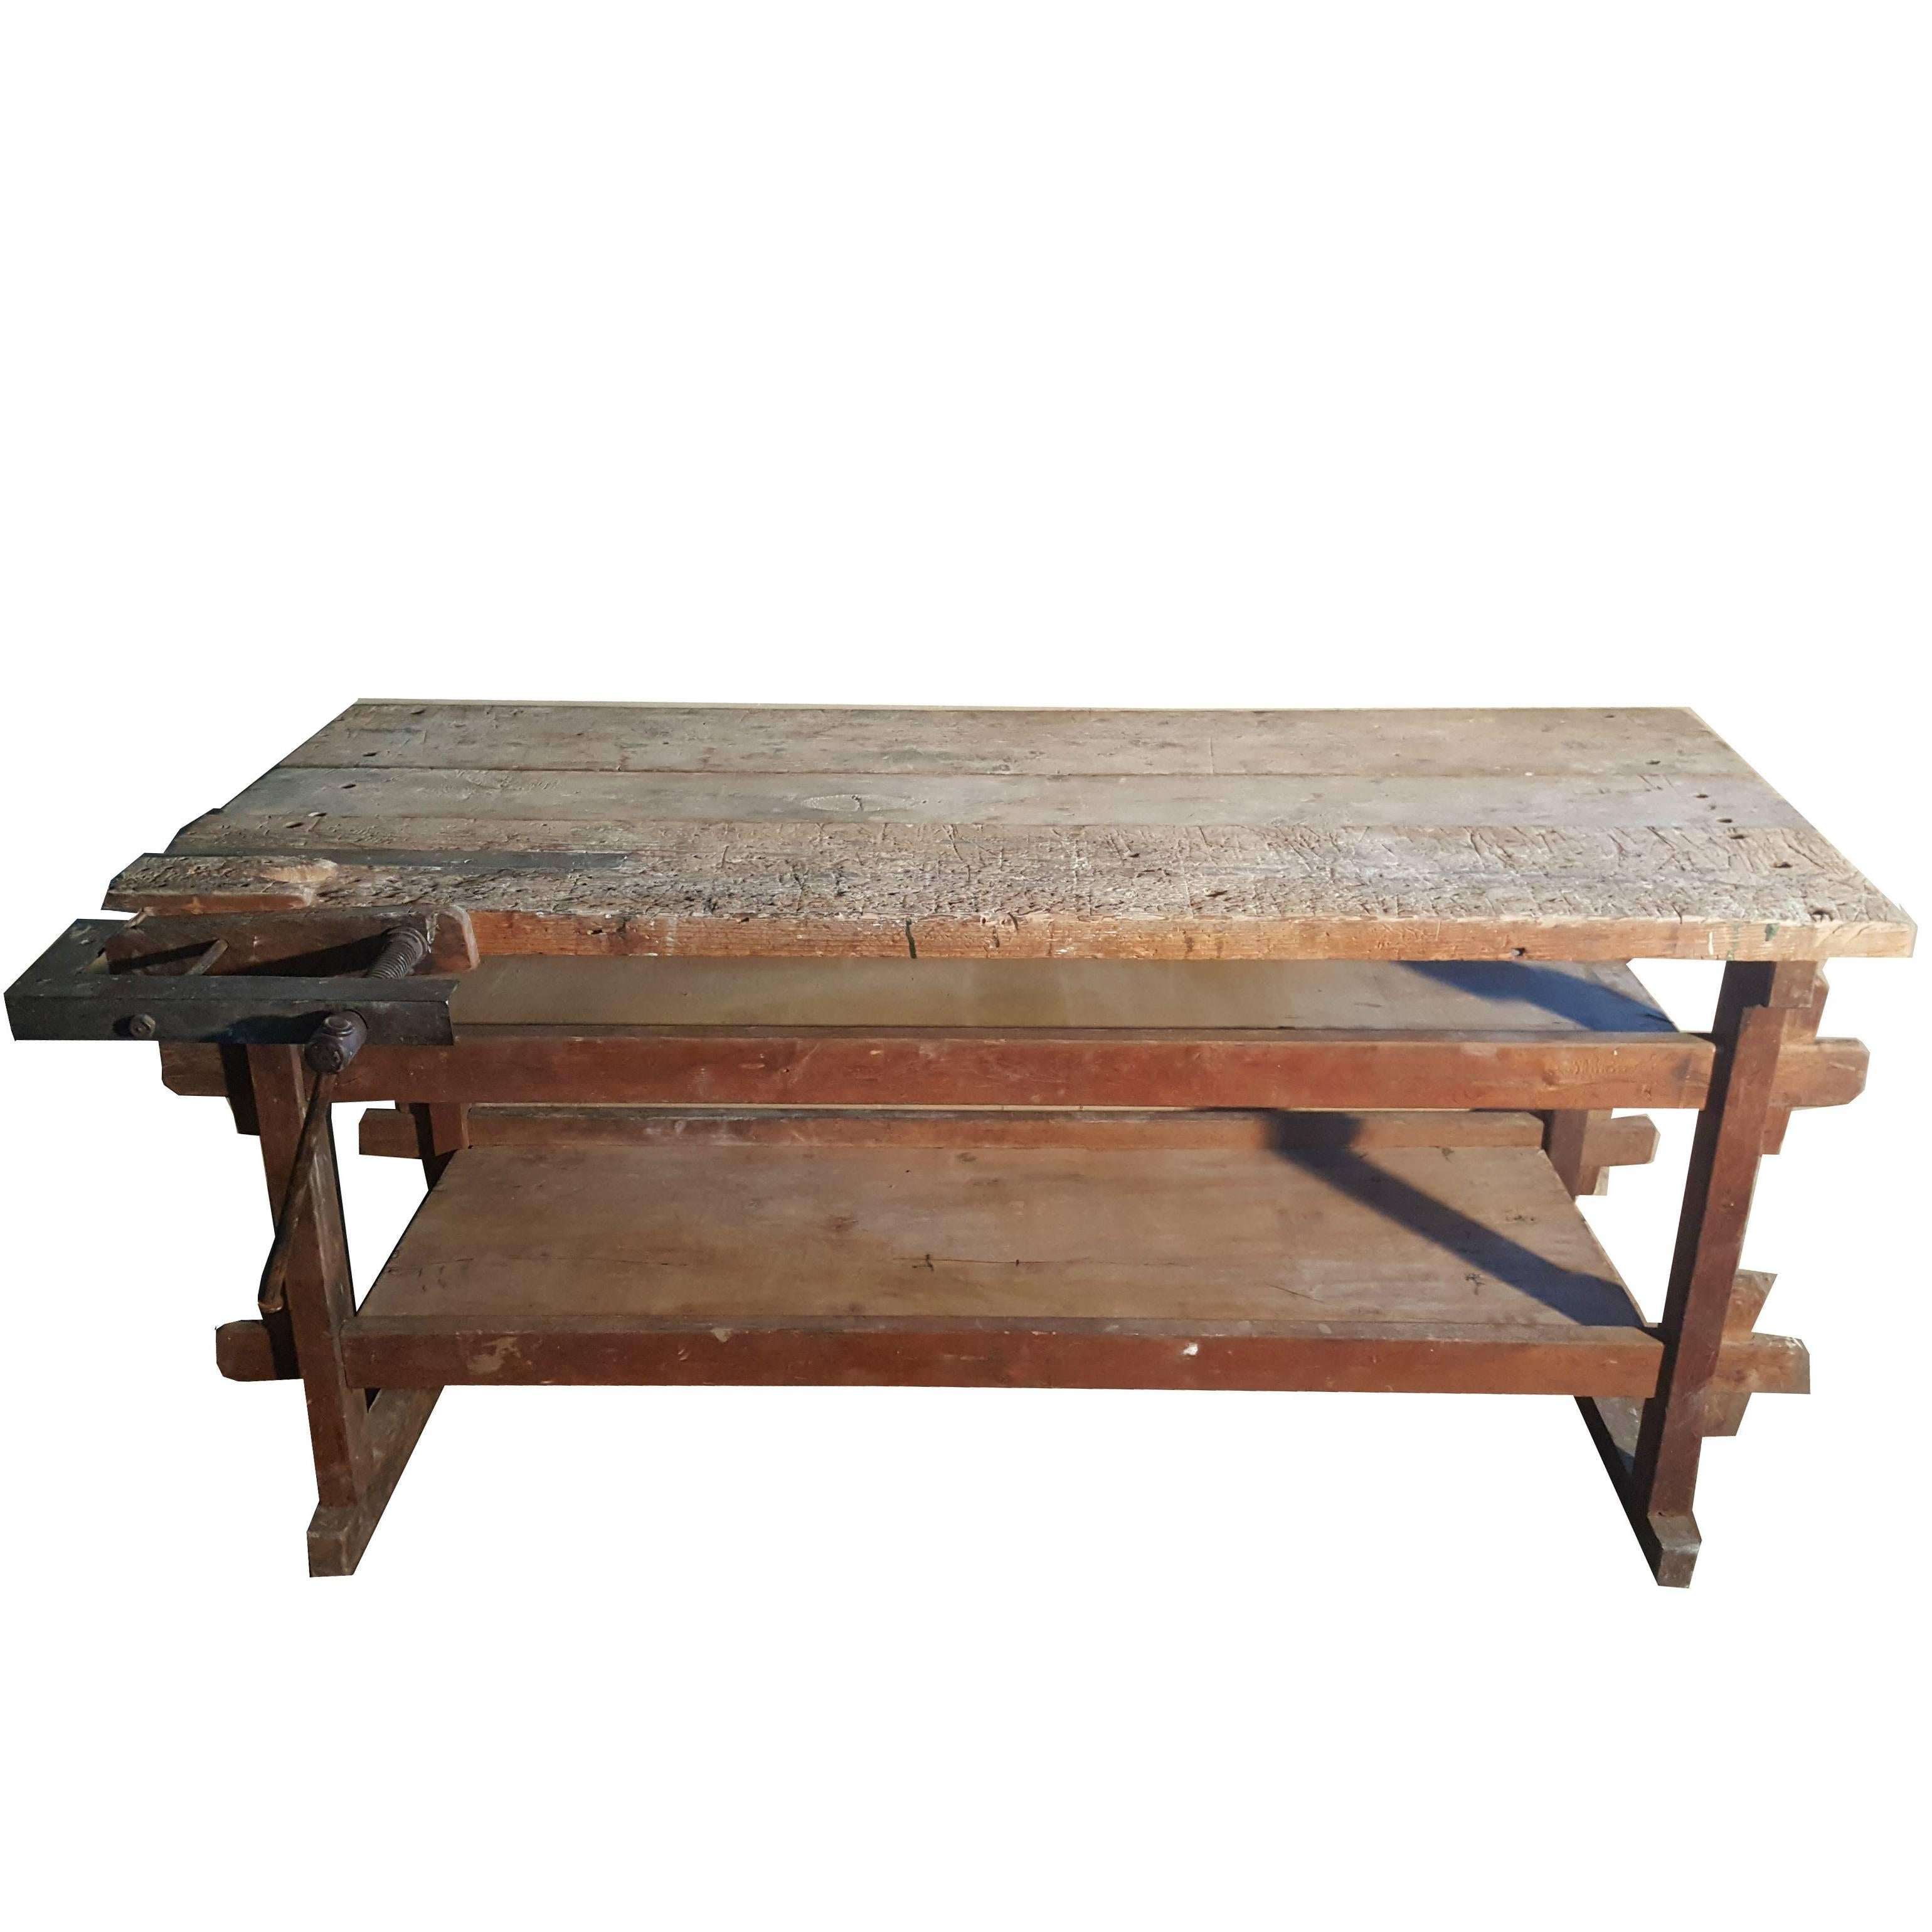 Vintage Industrial Wooden Work Bench or Carpenters Table, Early 20th Century For Sale